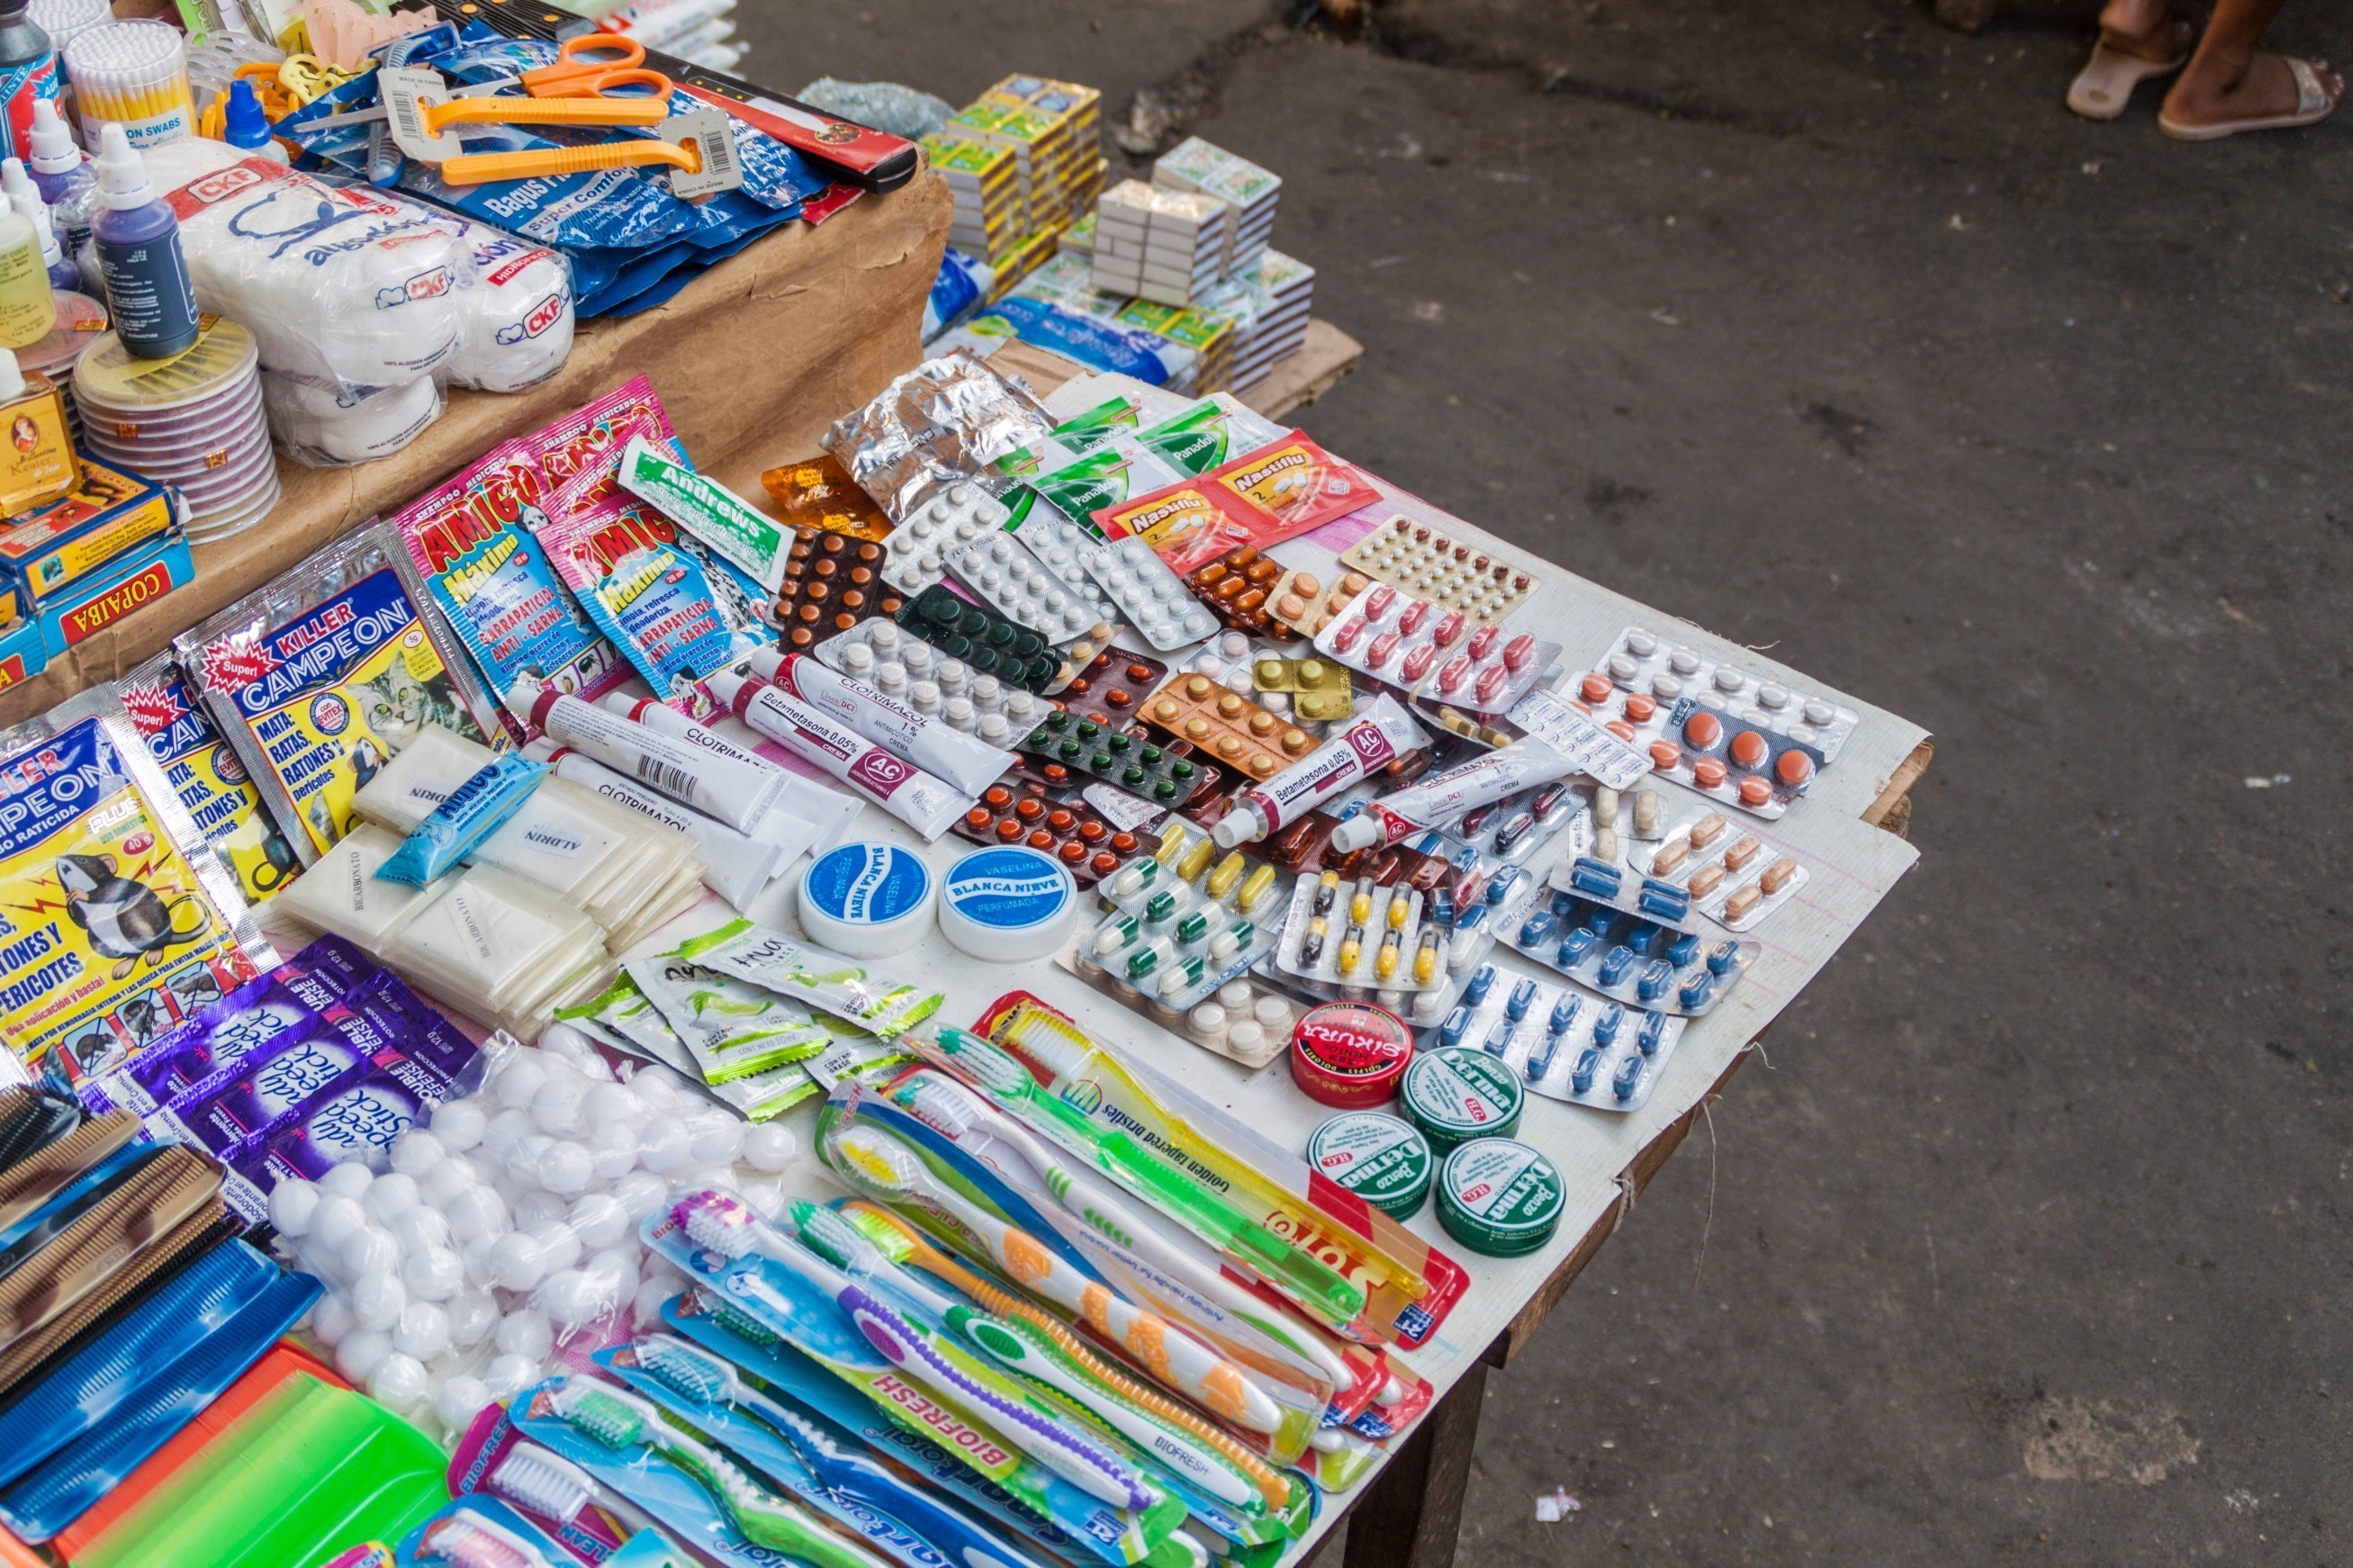 Falsified medicines sold by a street vendor